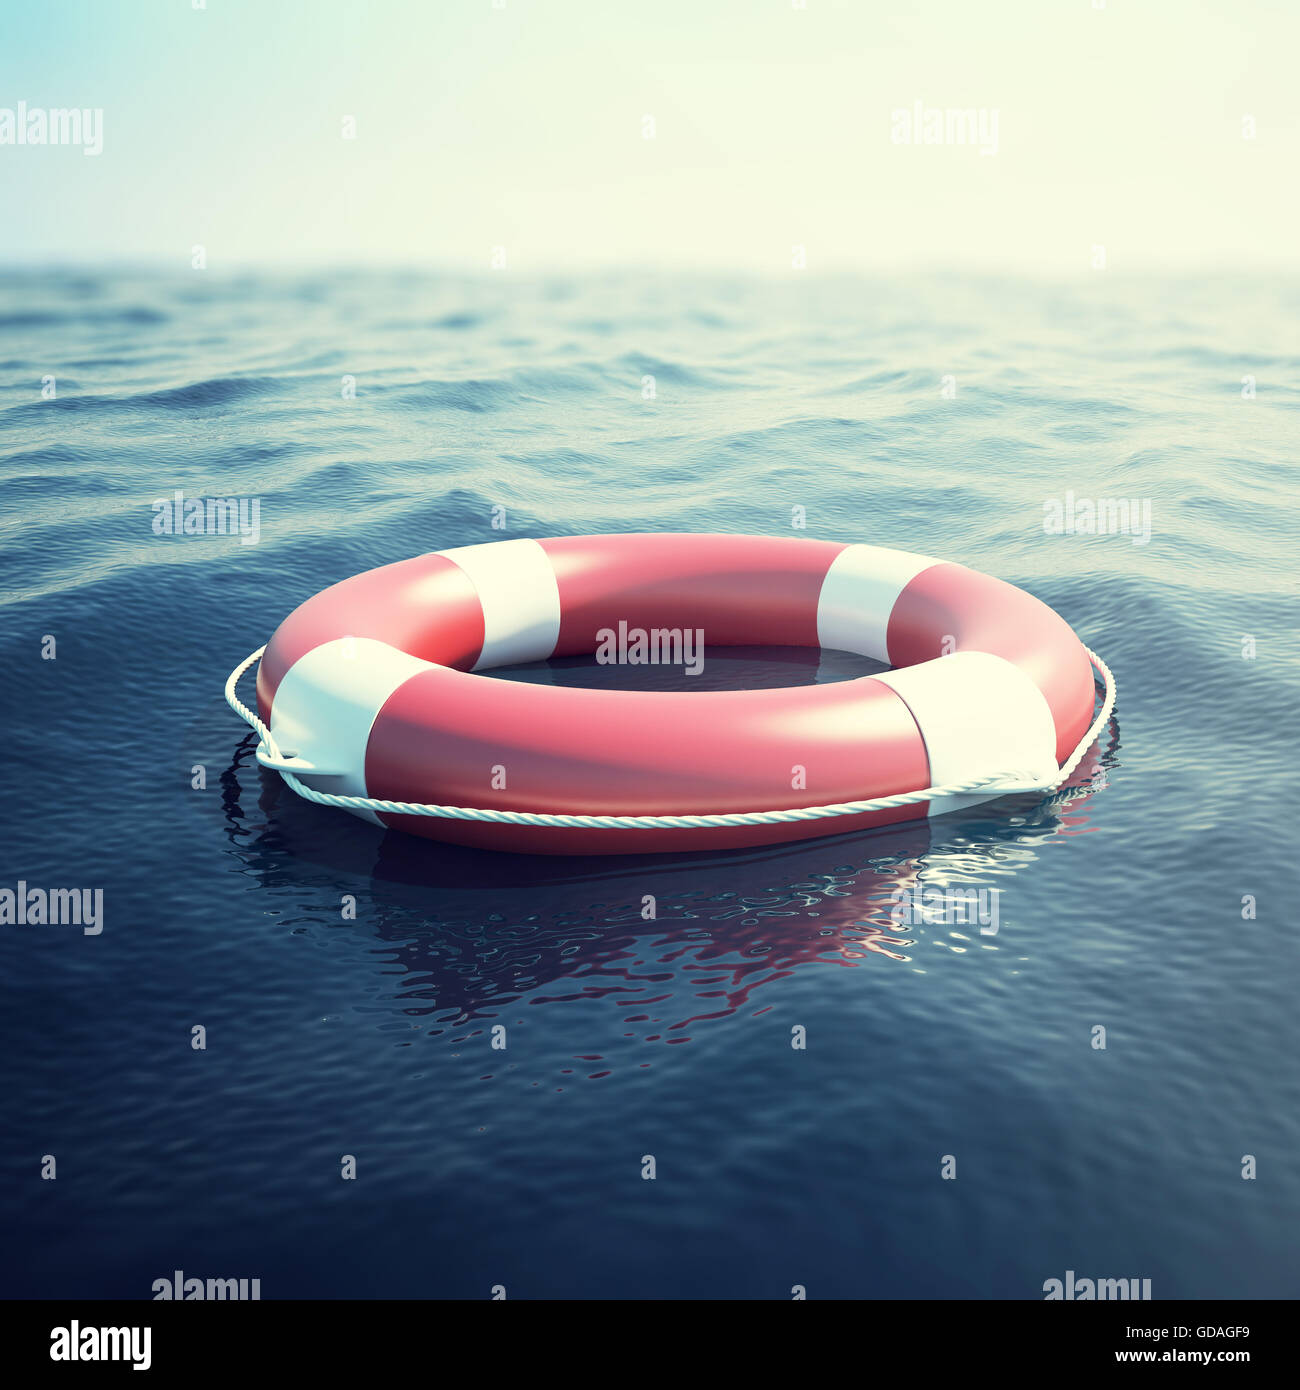 Red life buoy on the waves as a symbol of help and hope. 3d illustration Stock Photo